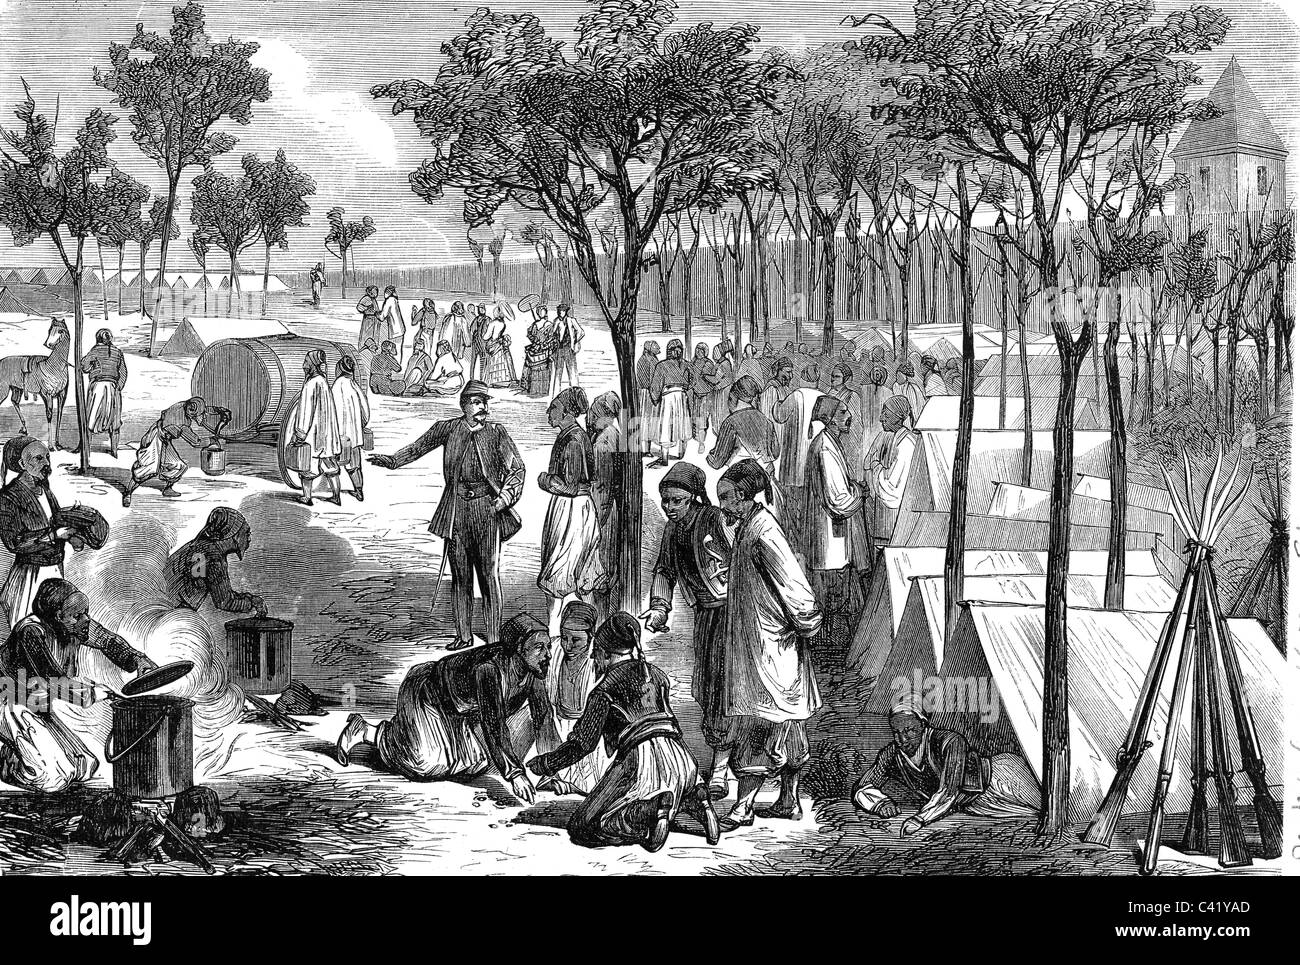 events, Franco-Prussian War 1870 - 1871, camp of French Zouaves, 1870, wood engraving, 19th century, soldiers, bivouac, cooking, food, tents, colonial infantry, North Africans, France, Franco Prussian, historic, historical, people, Additional-Rights-Clearences-Not Available Stock Photo